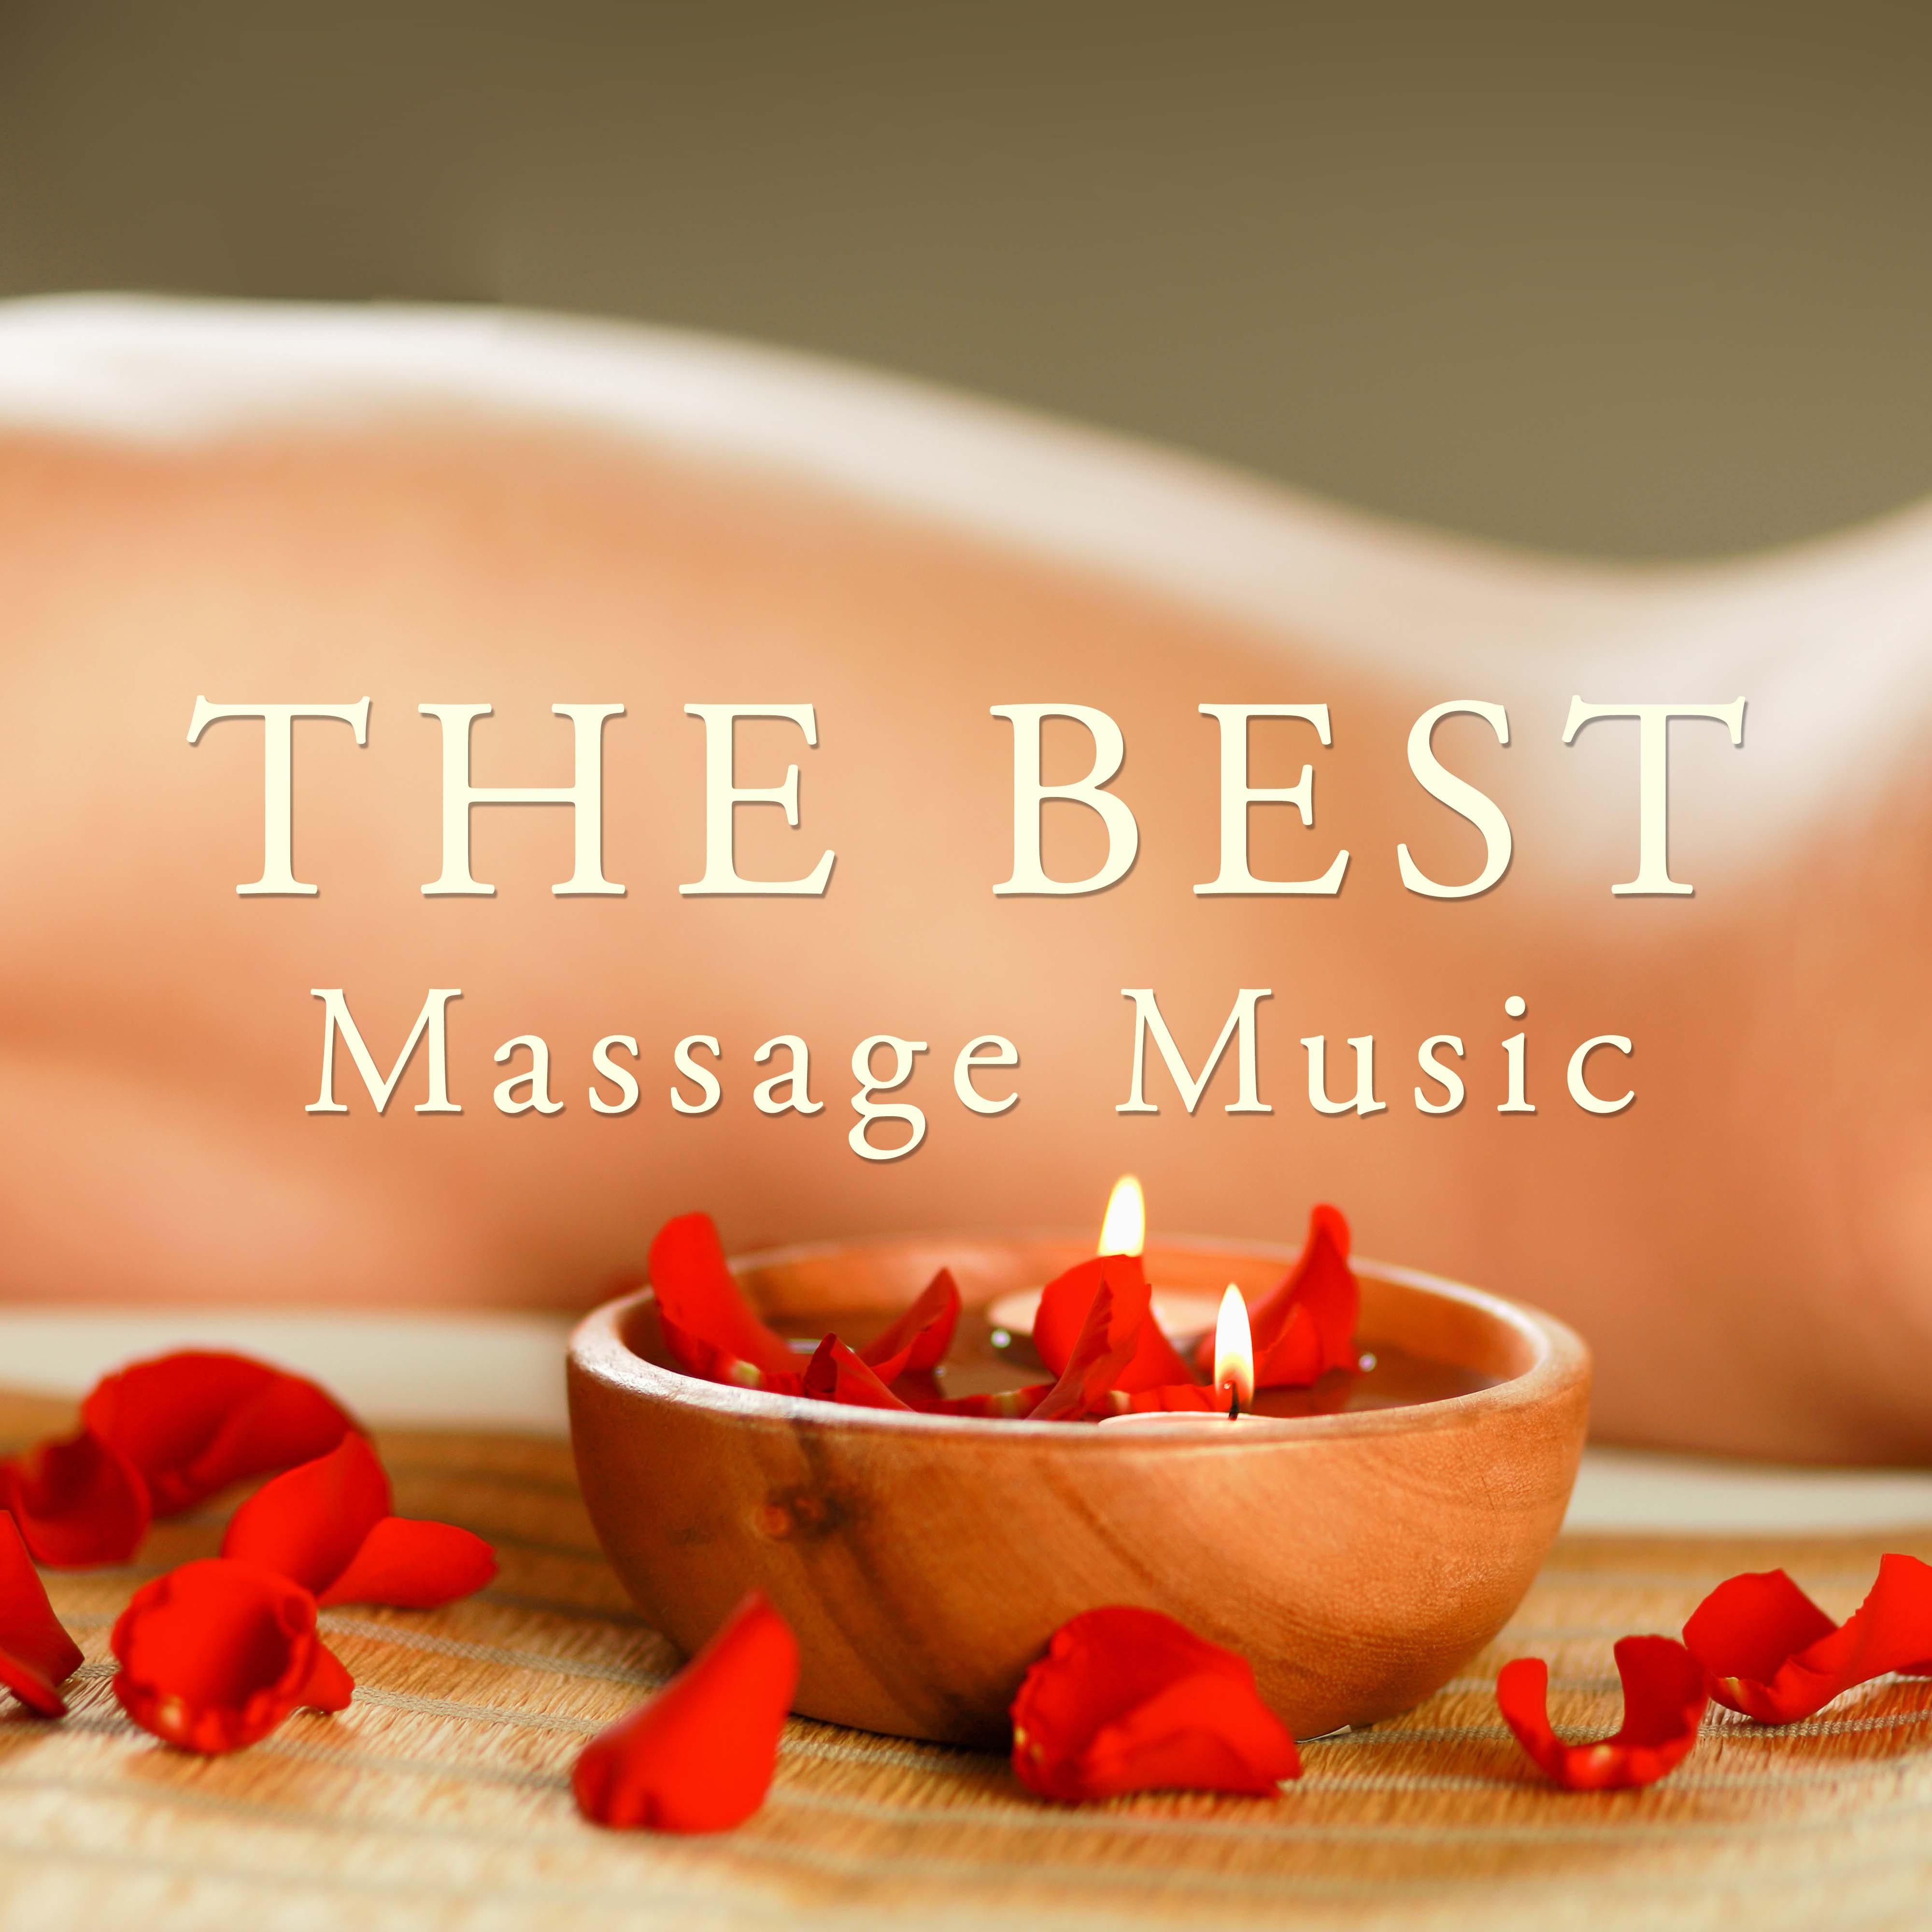 The Best Massage Music for Spas and Wellness Centers